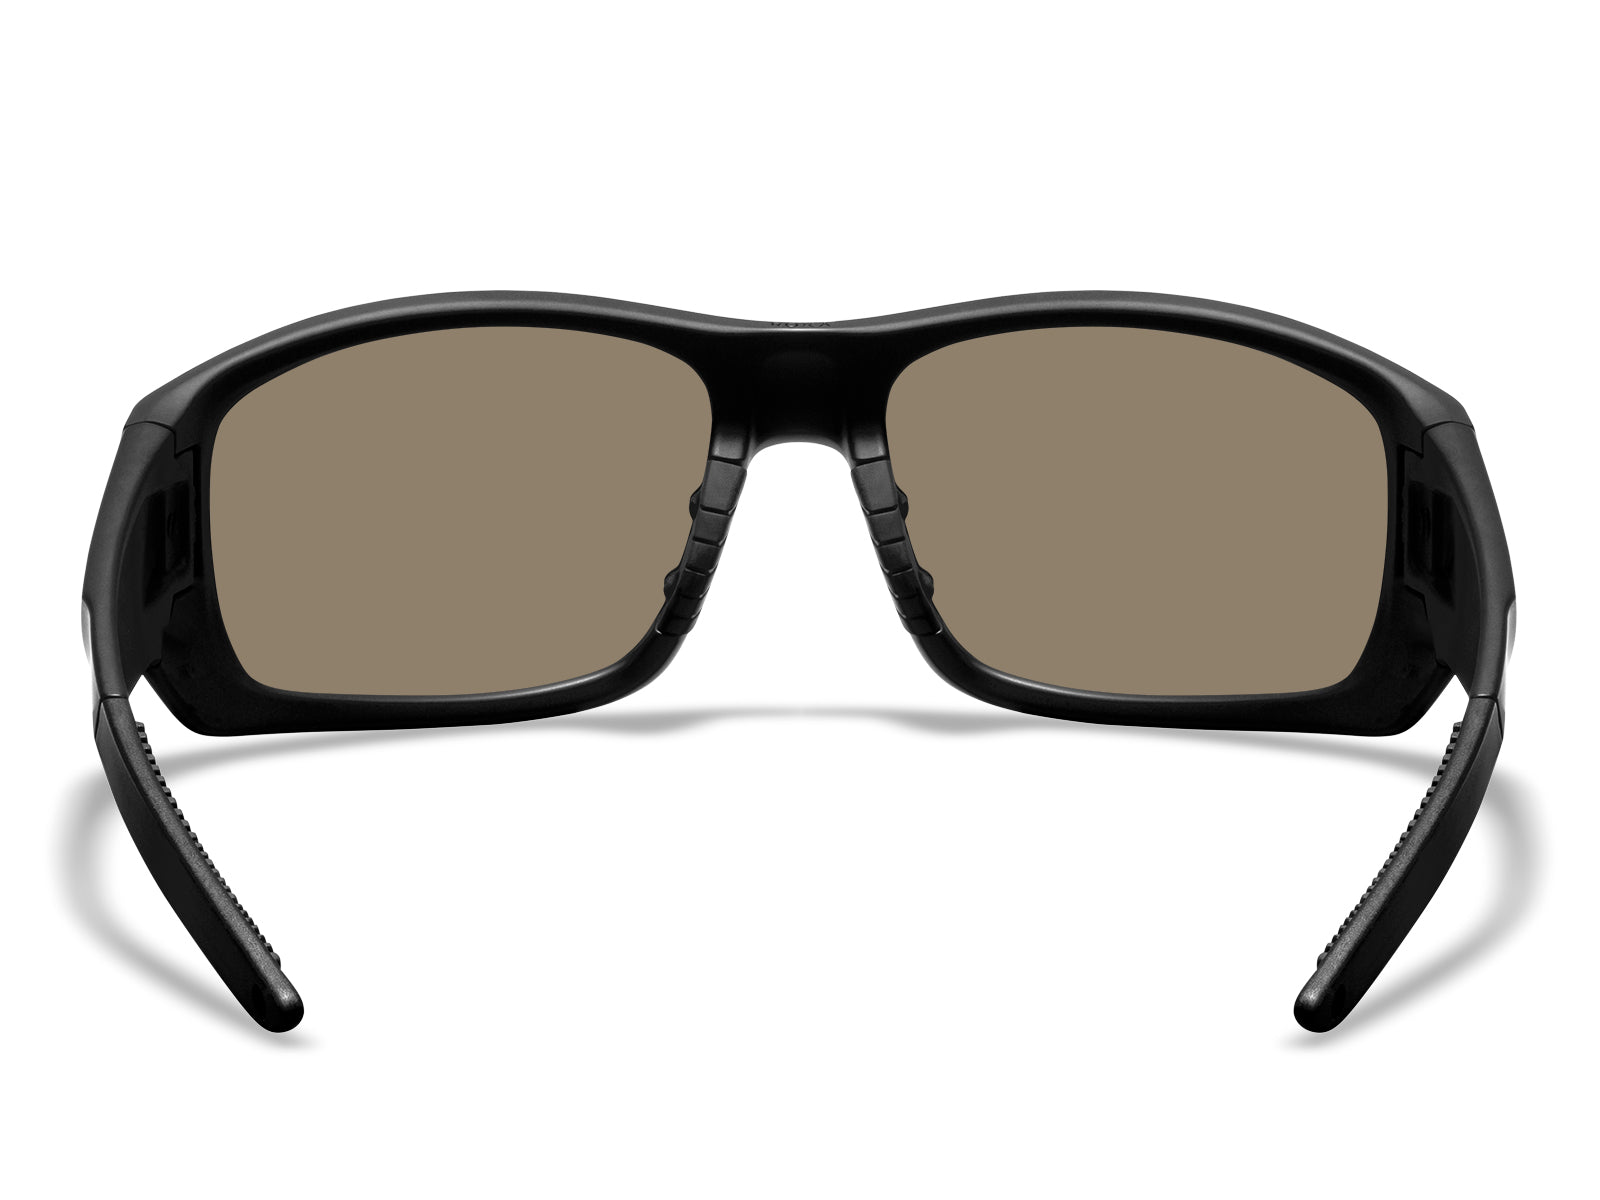 AT-1x Sunglasses ― Buy Online